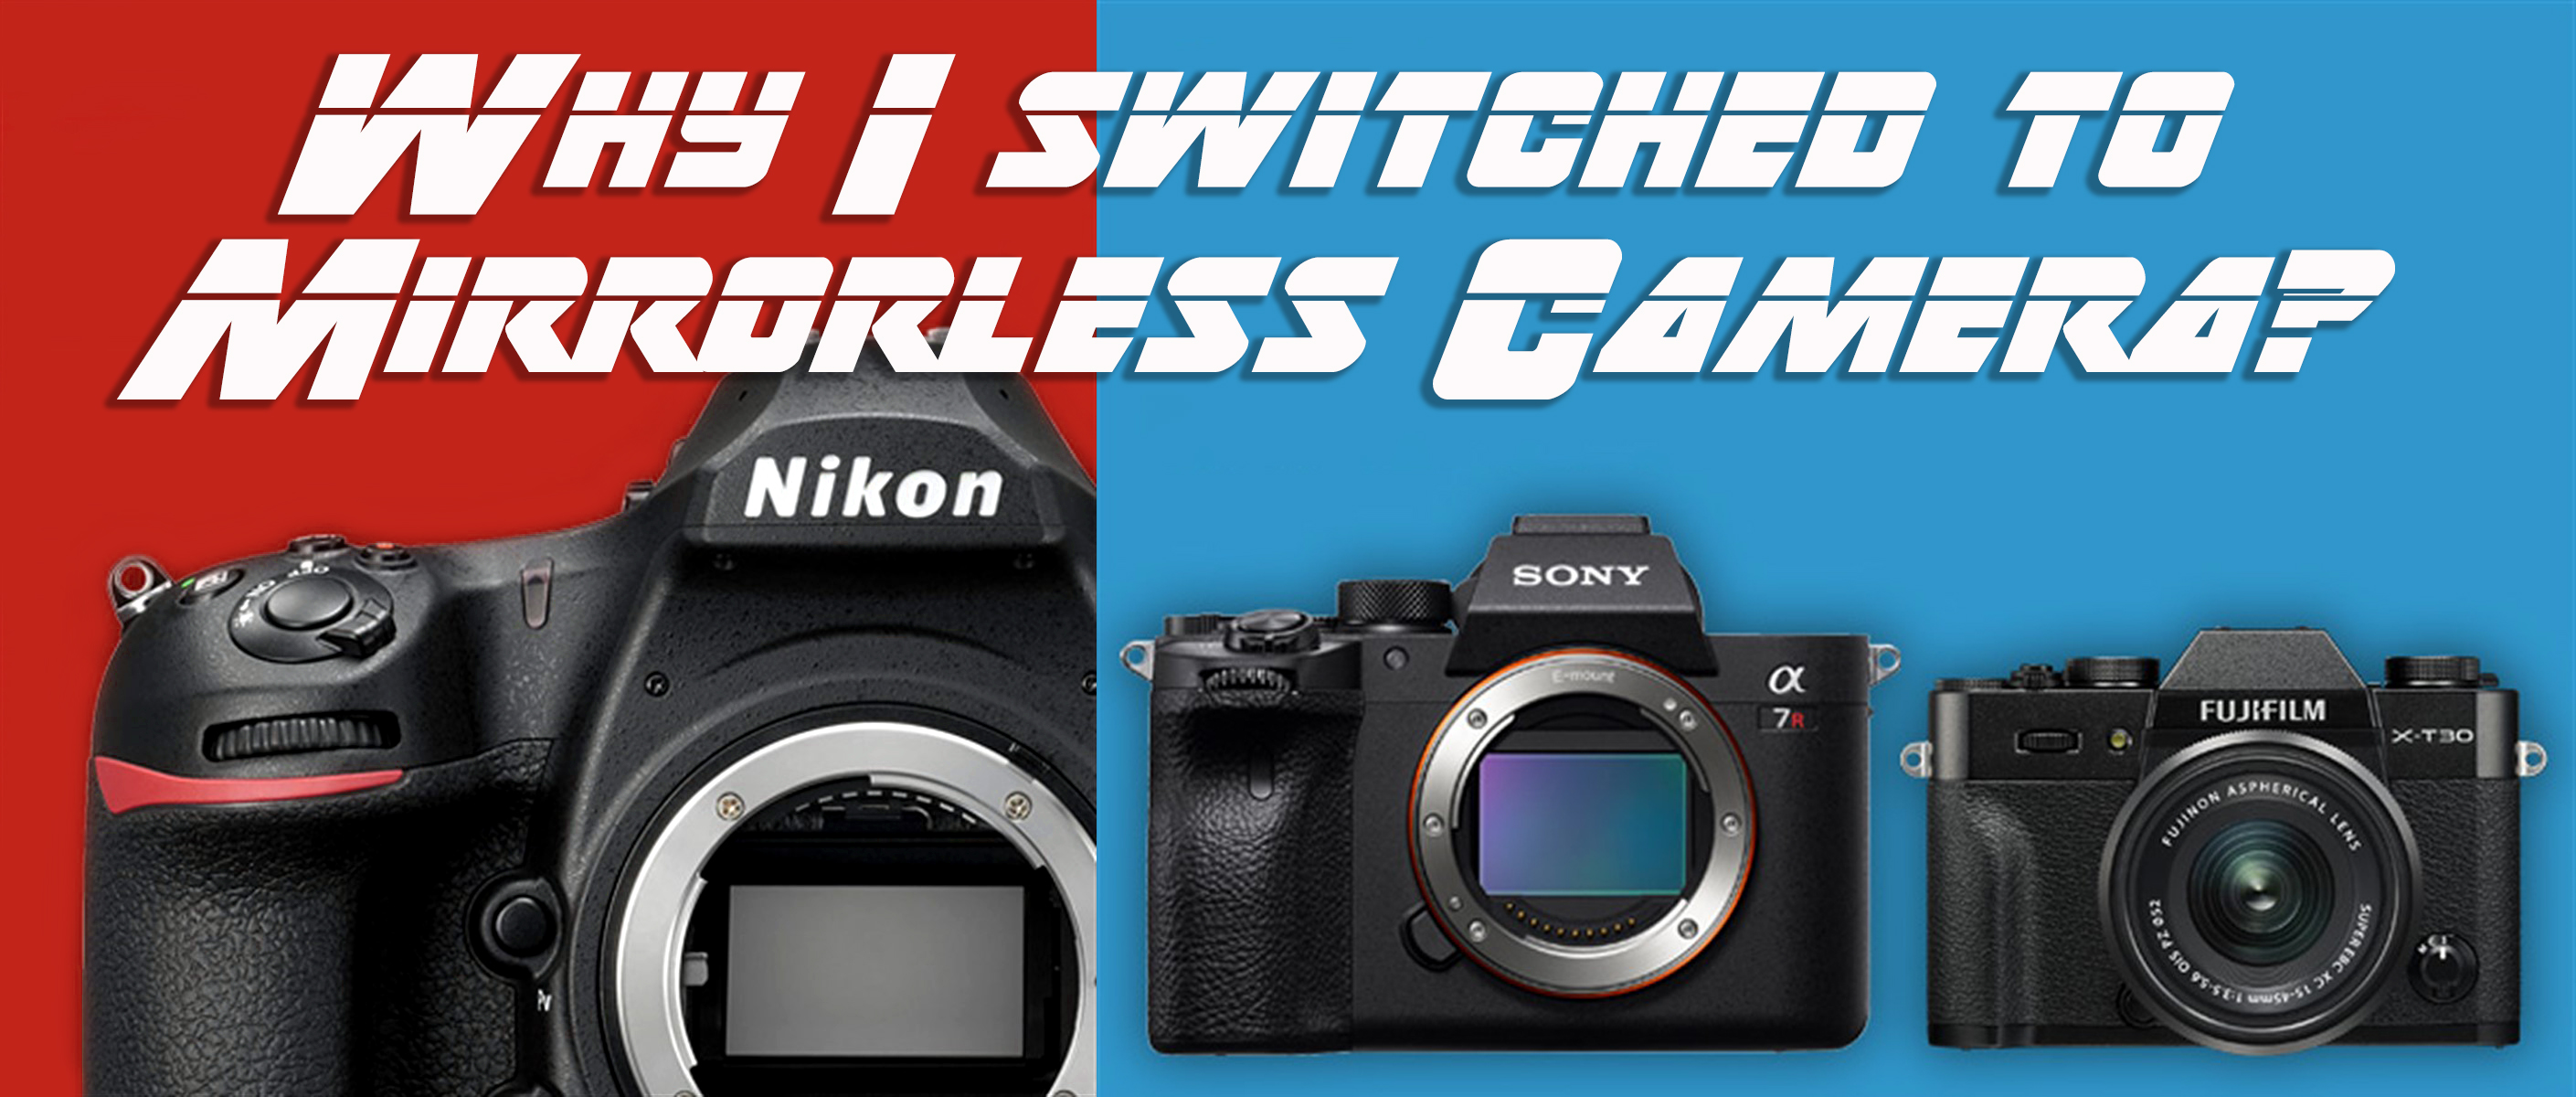 WHY I SWITCHED TO A MIRRORLESS CAMERA